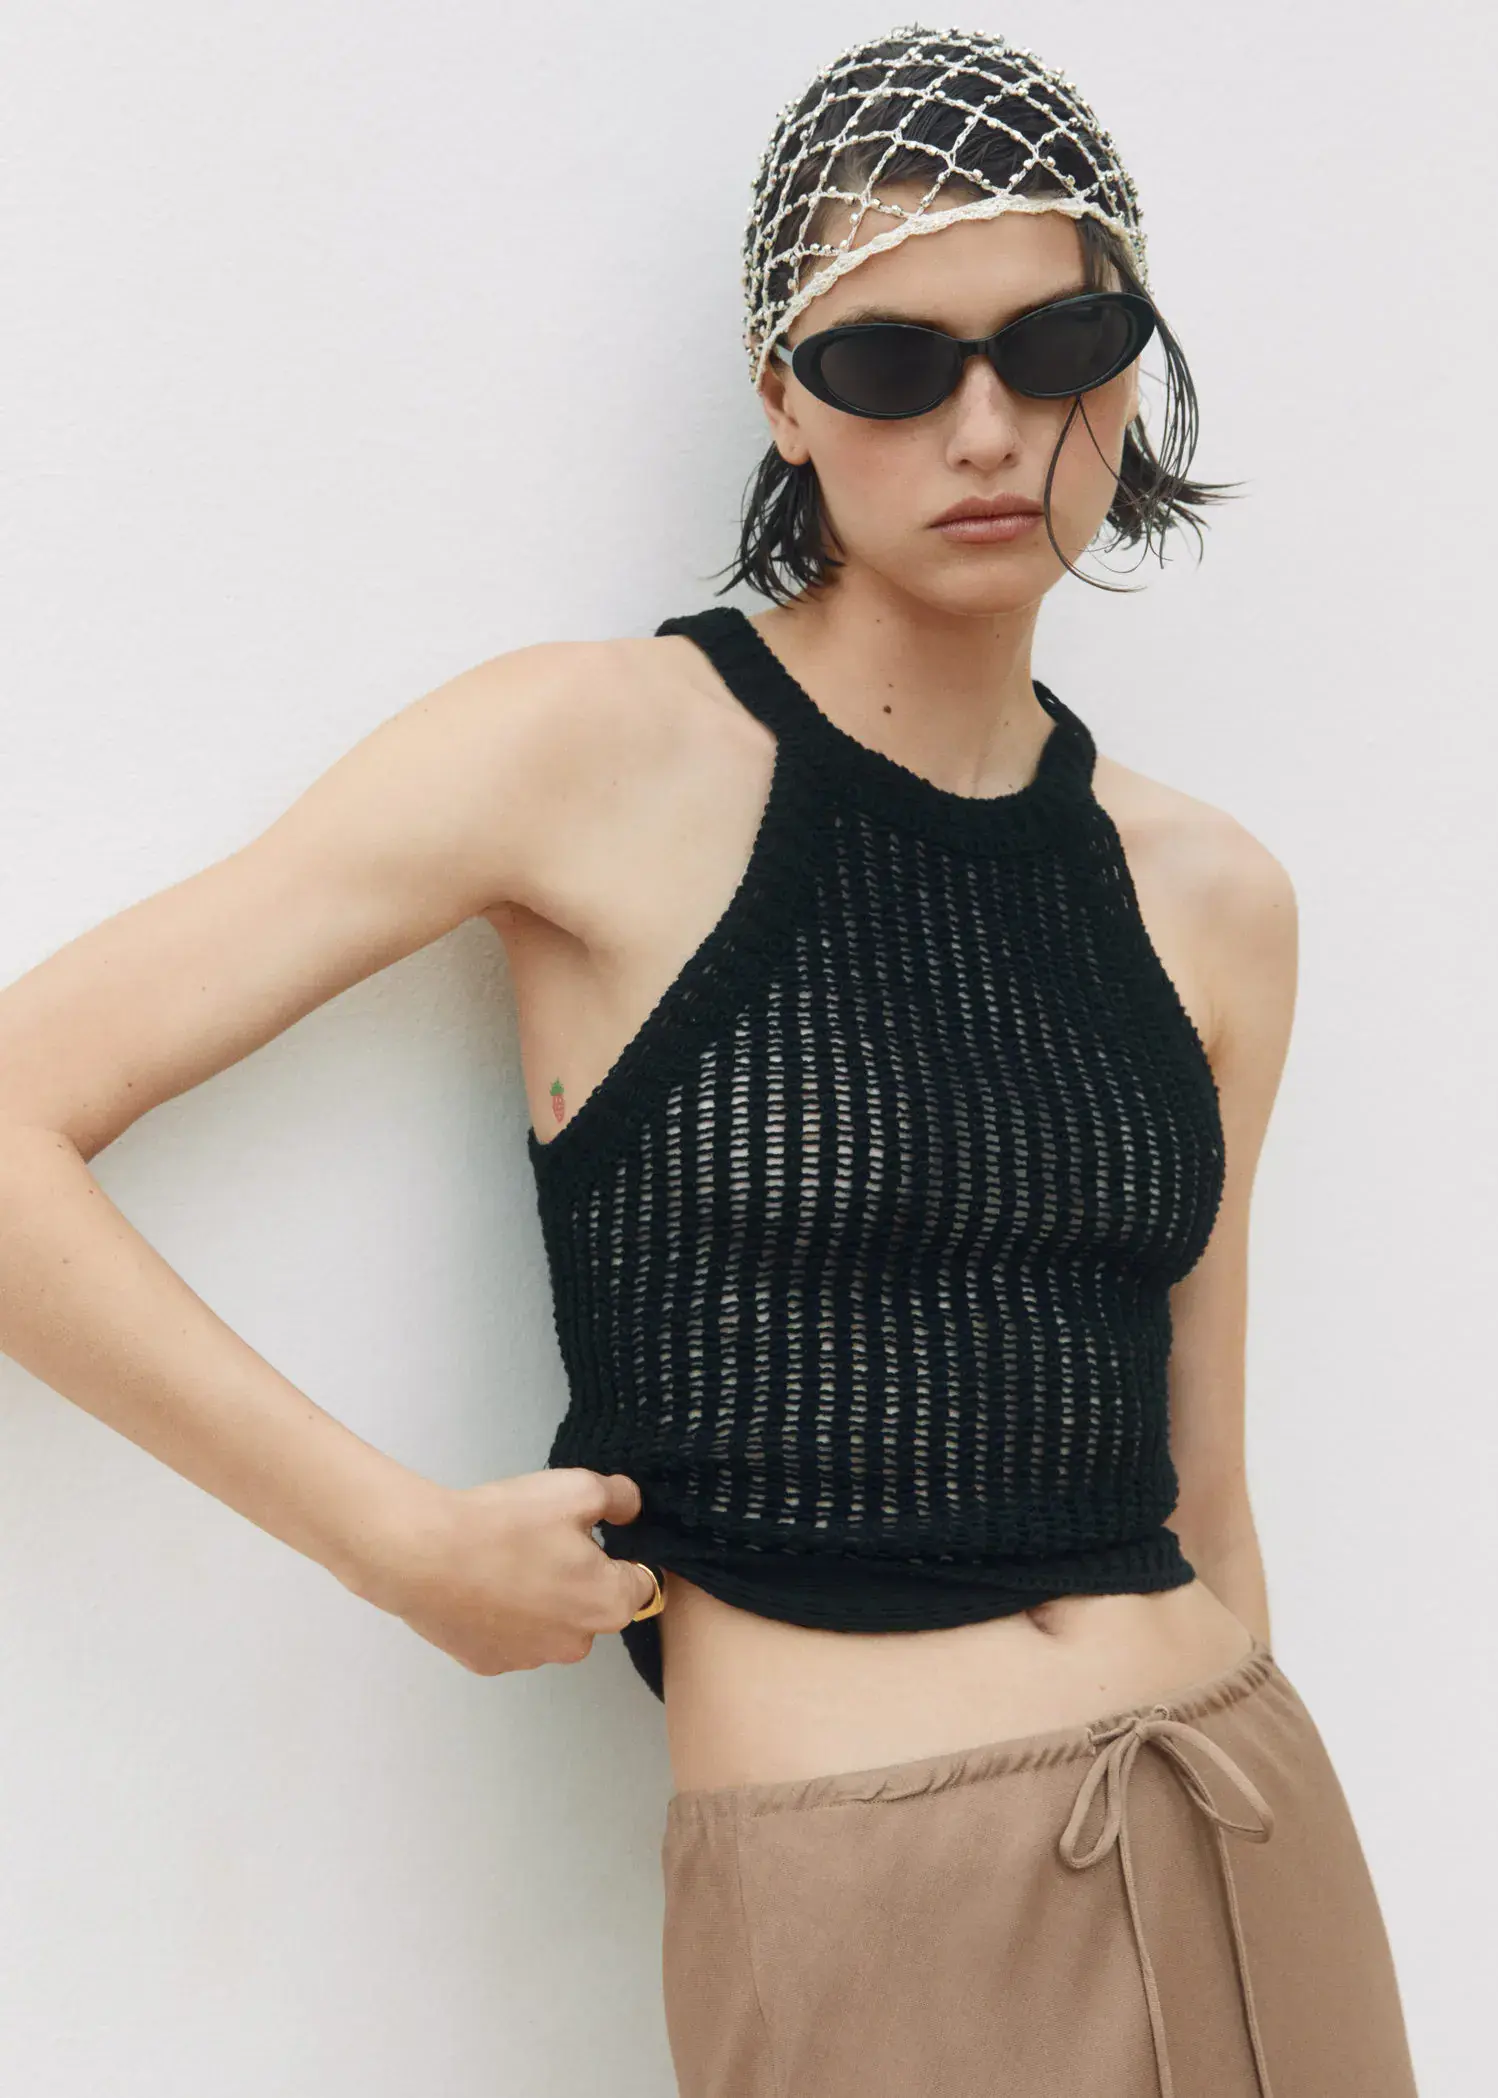 Mango Halter-neck knitted top. a woman wearing sunglasses and a black tank top. 